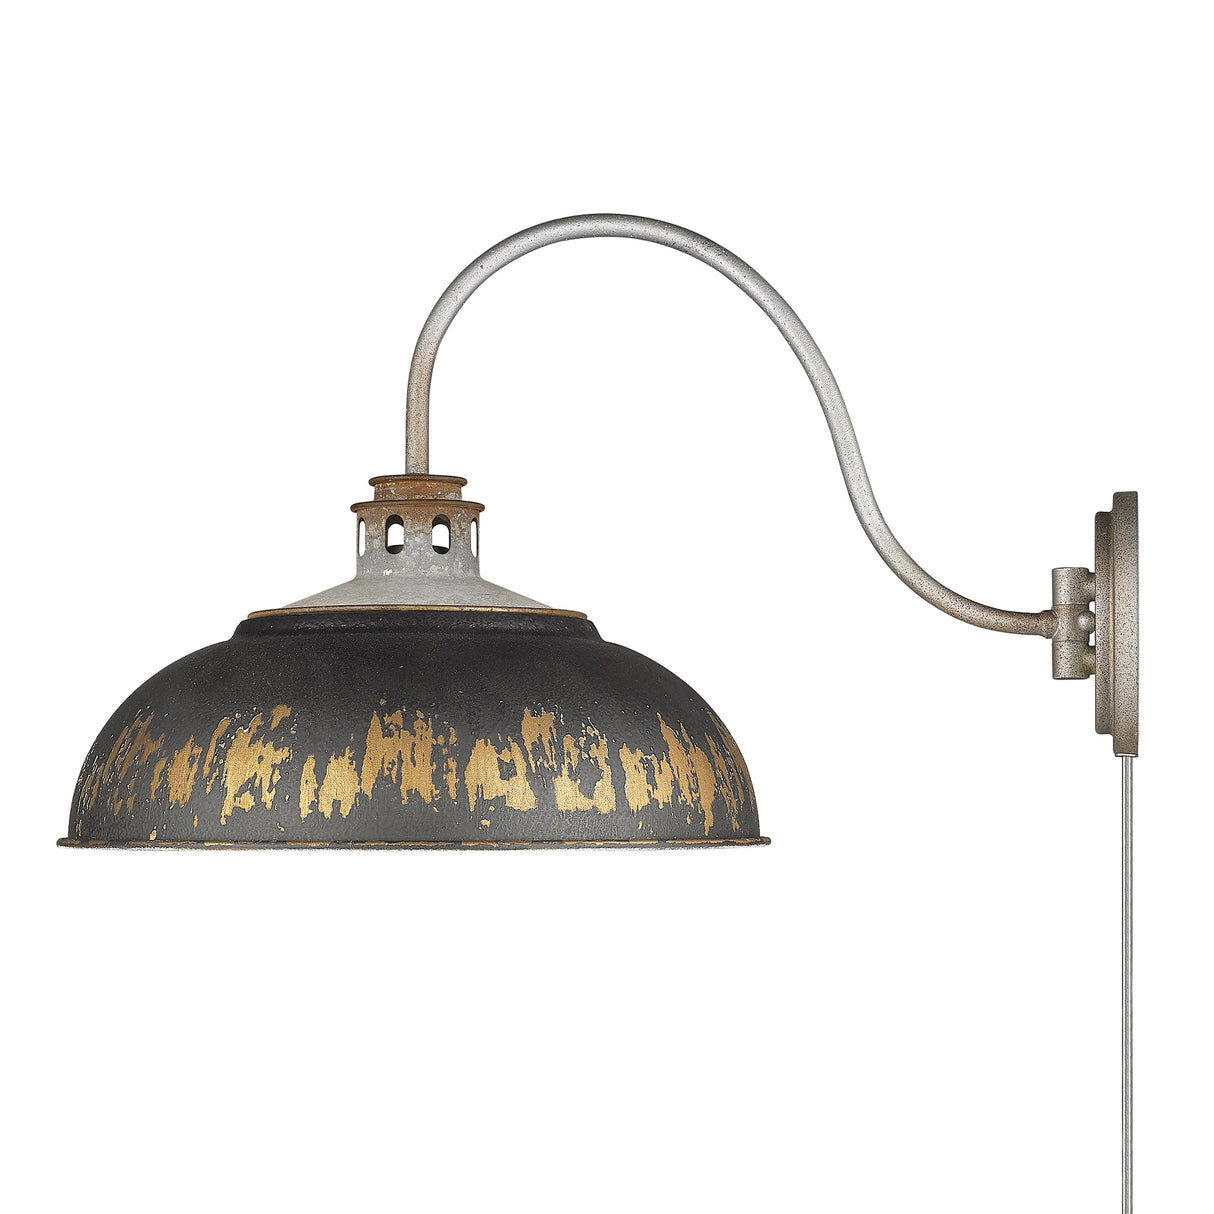 Kinsley 1 Light Articulating Wall Sconce in Aged Galvanized Steel with Antique Black Iron Shade